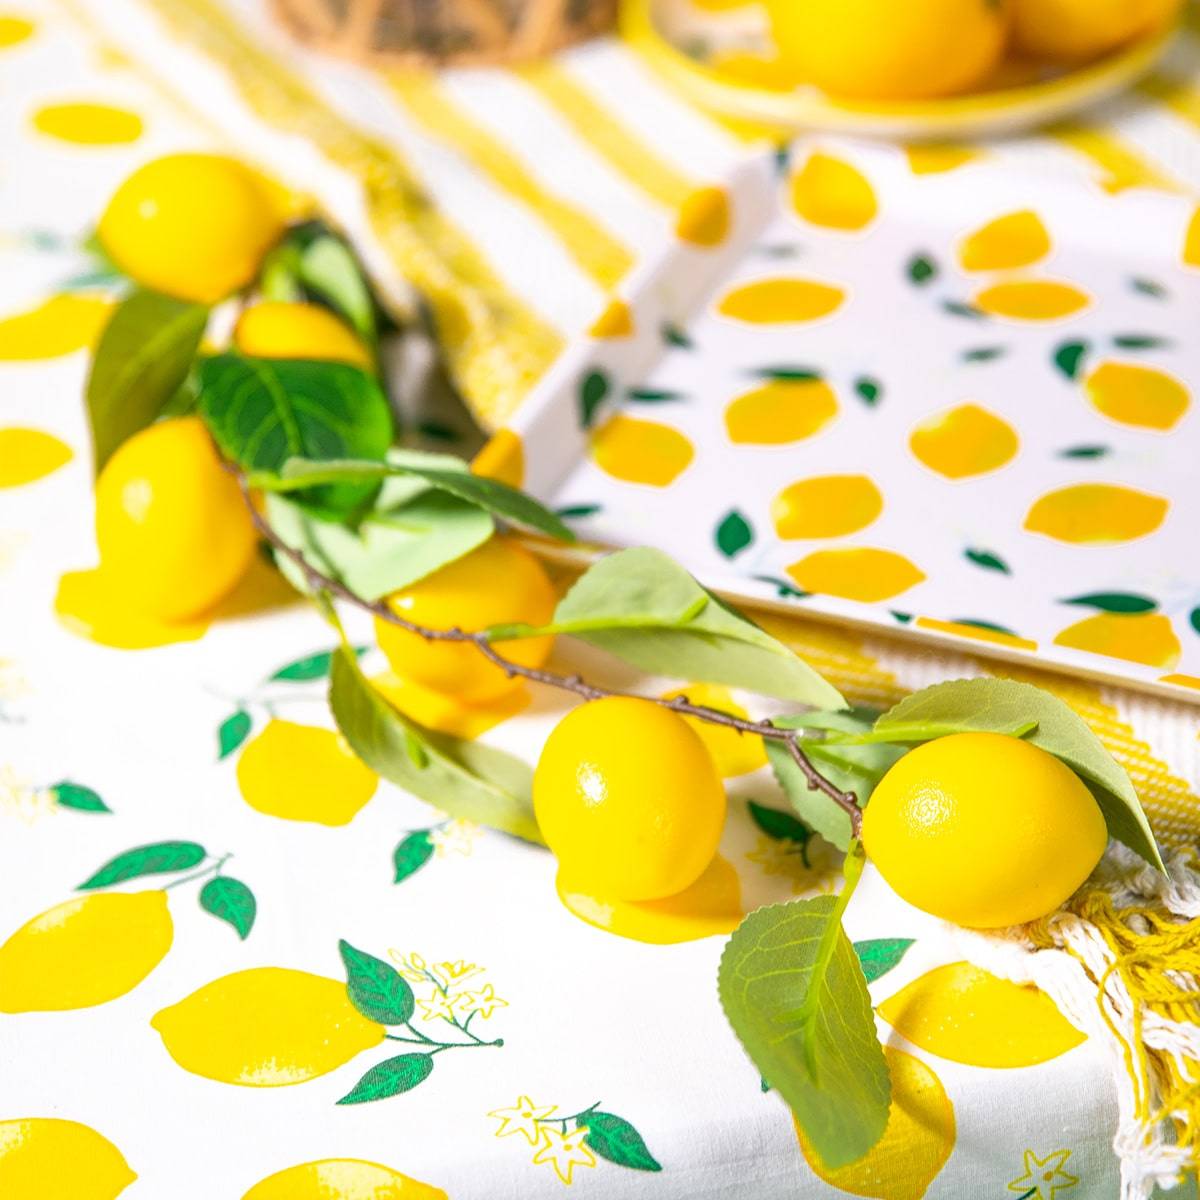 An artistic display of artificial lemons and green leaves artistically arranged on a lemon-print tablecloth. The bright yellow lemons and vibrant greenery are accentuated against a patterned backdrop, enhancing the summer-themed decor with a refreshing and lively visual appeal.